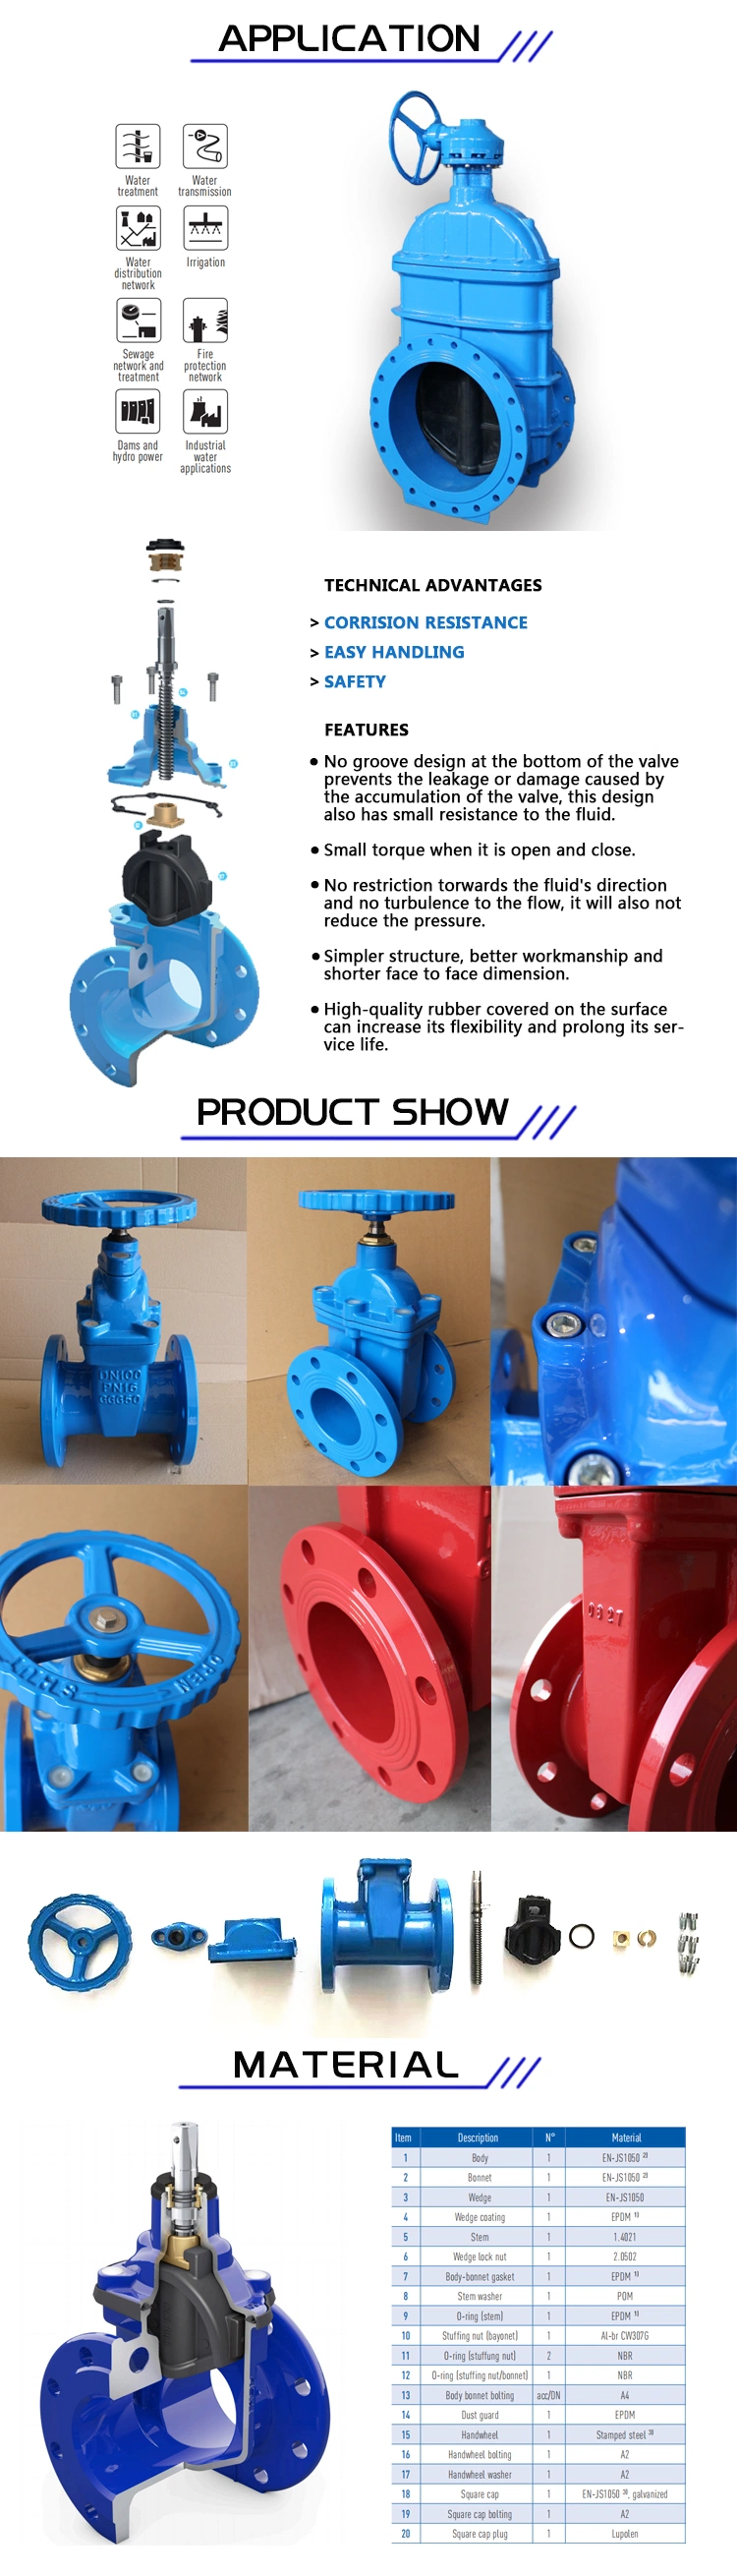 Motor Operated Power Down Reset Motorized Electric Actuated Gate Valve